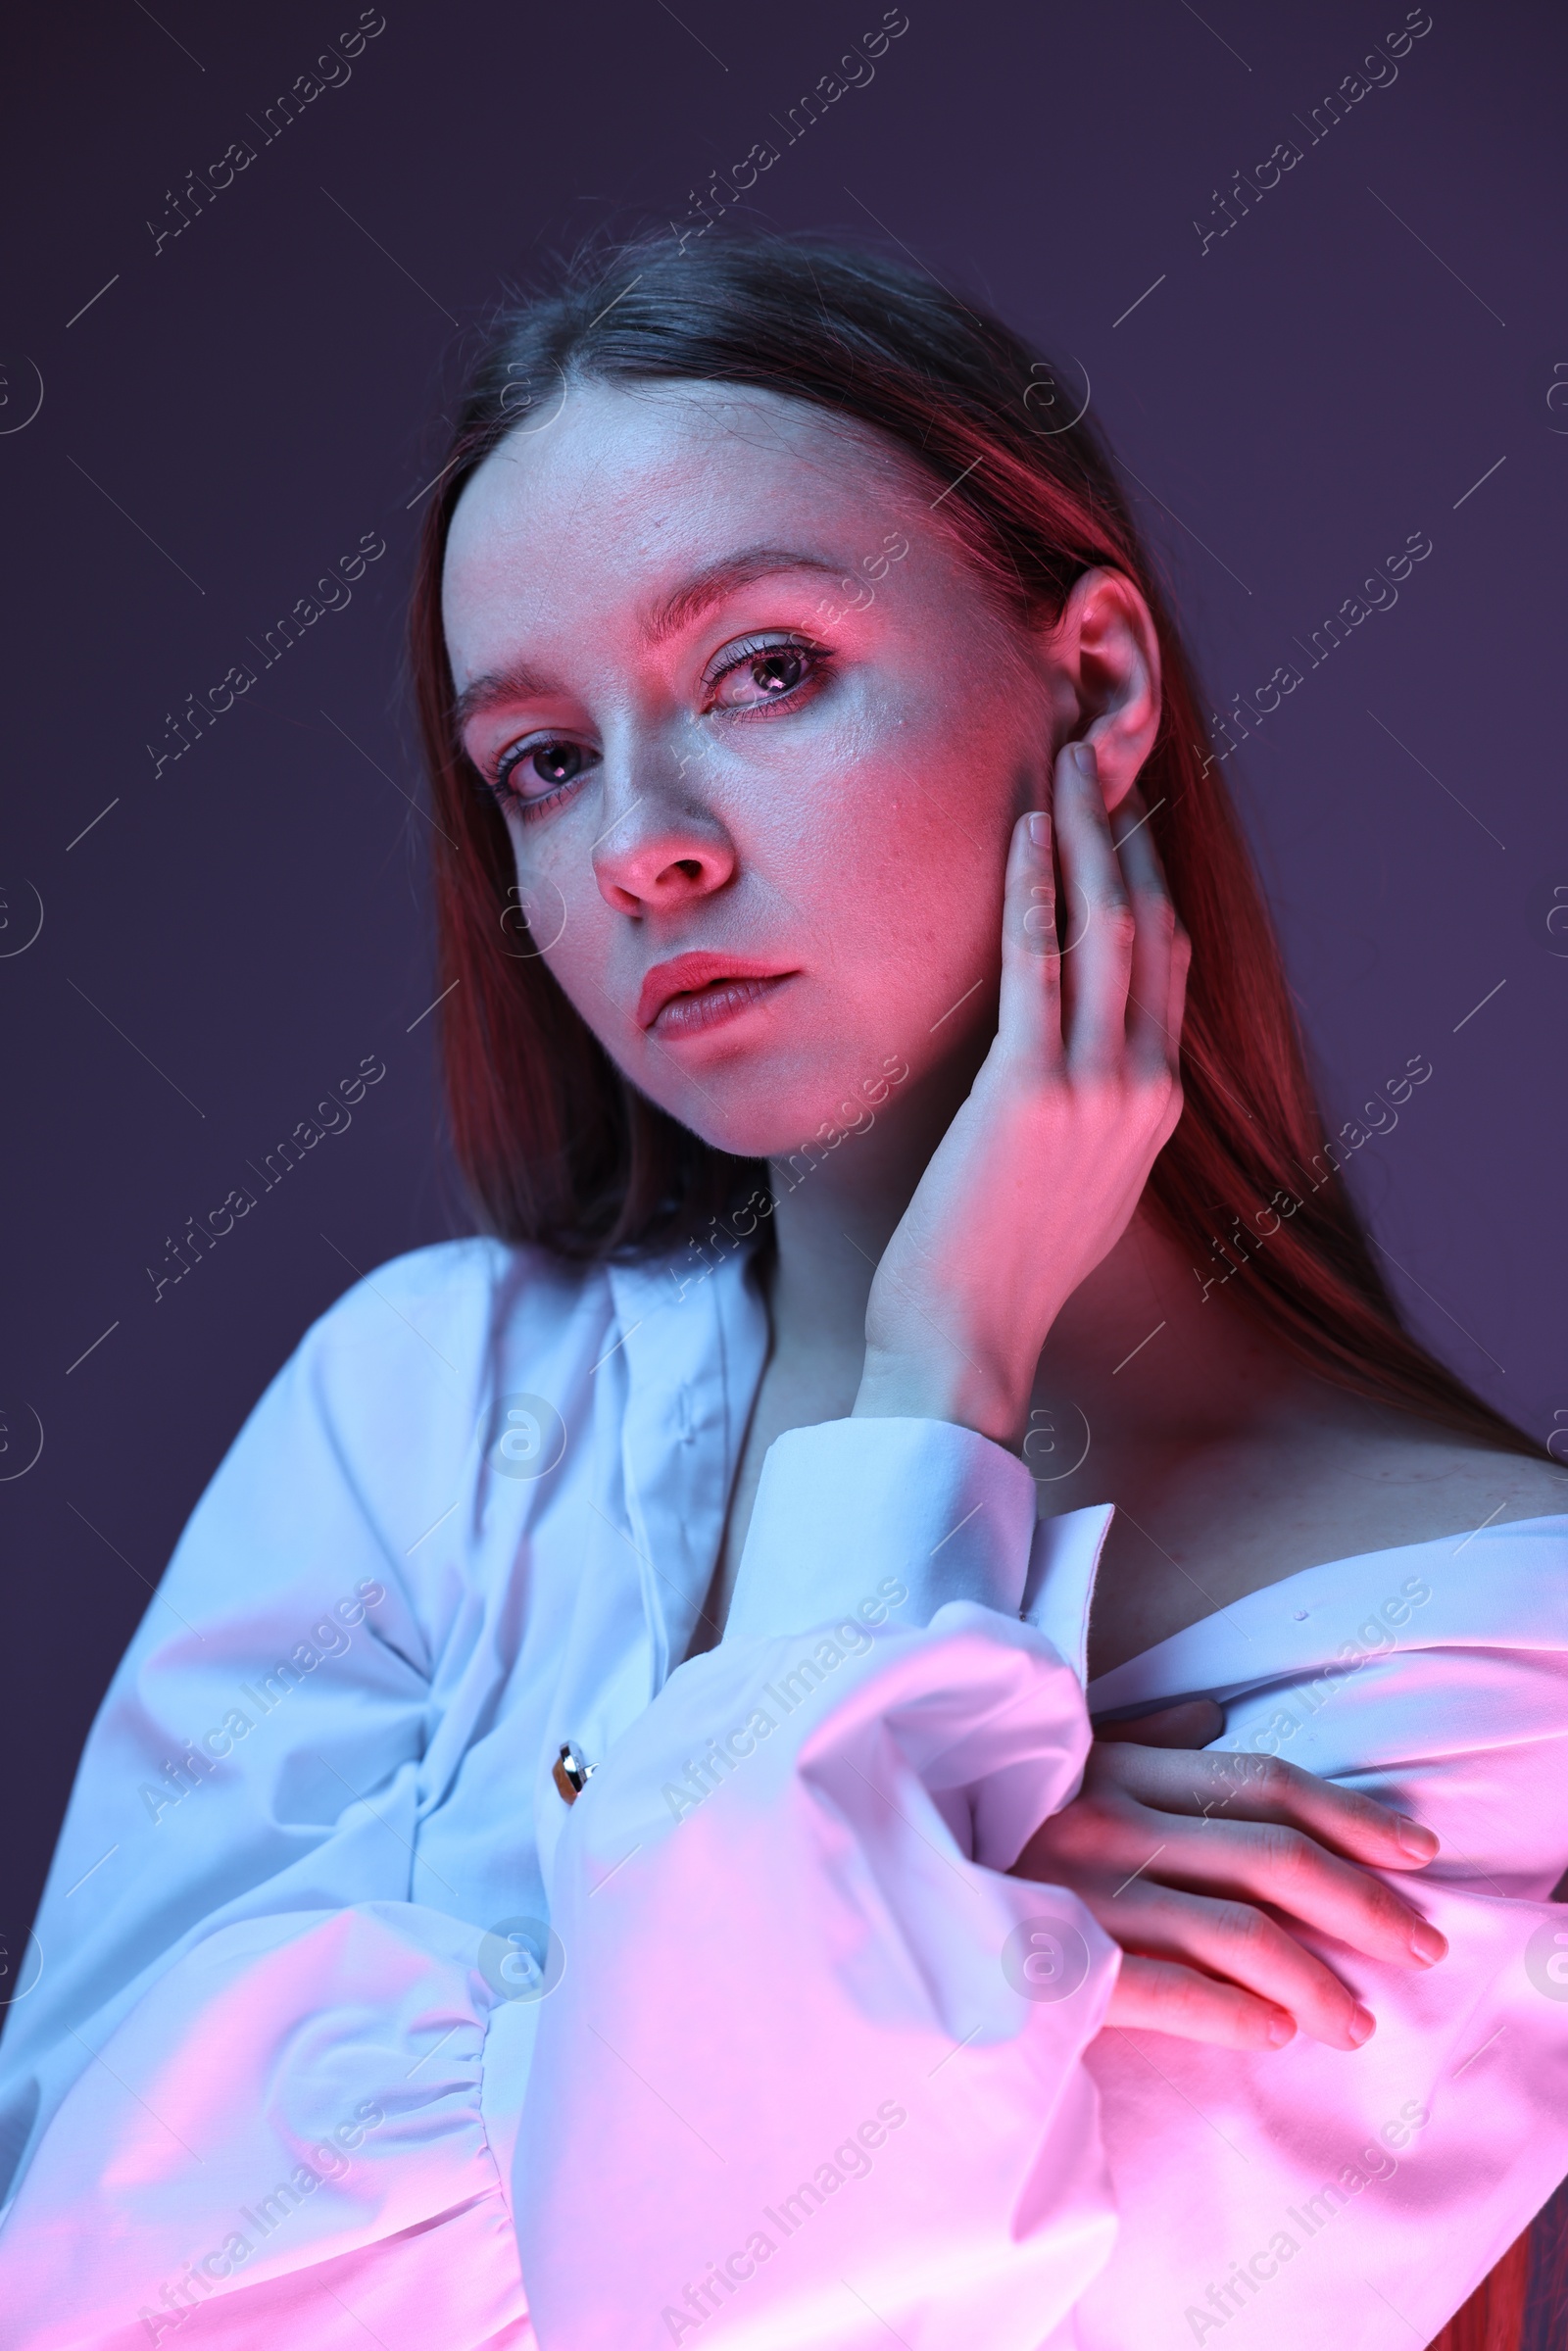 Photo of Fashionable portrait of beautiful young woman on purple background in neon lights